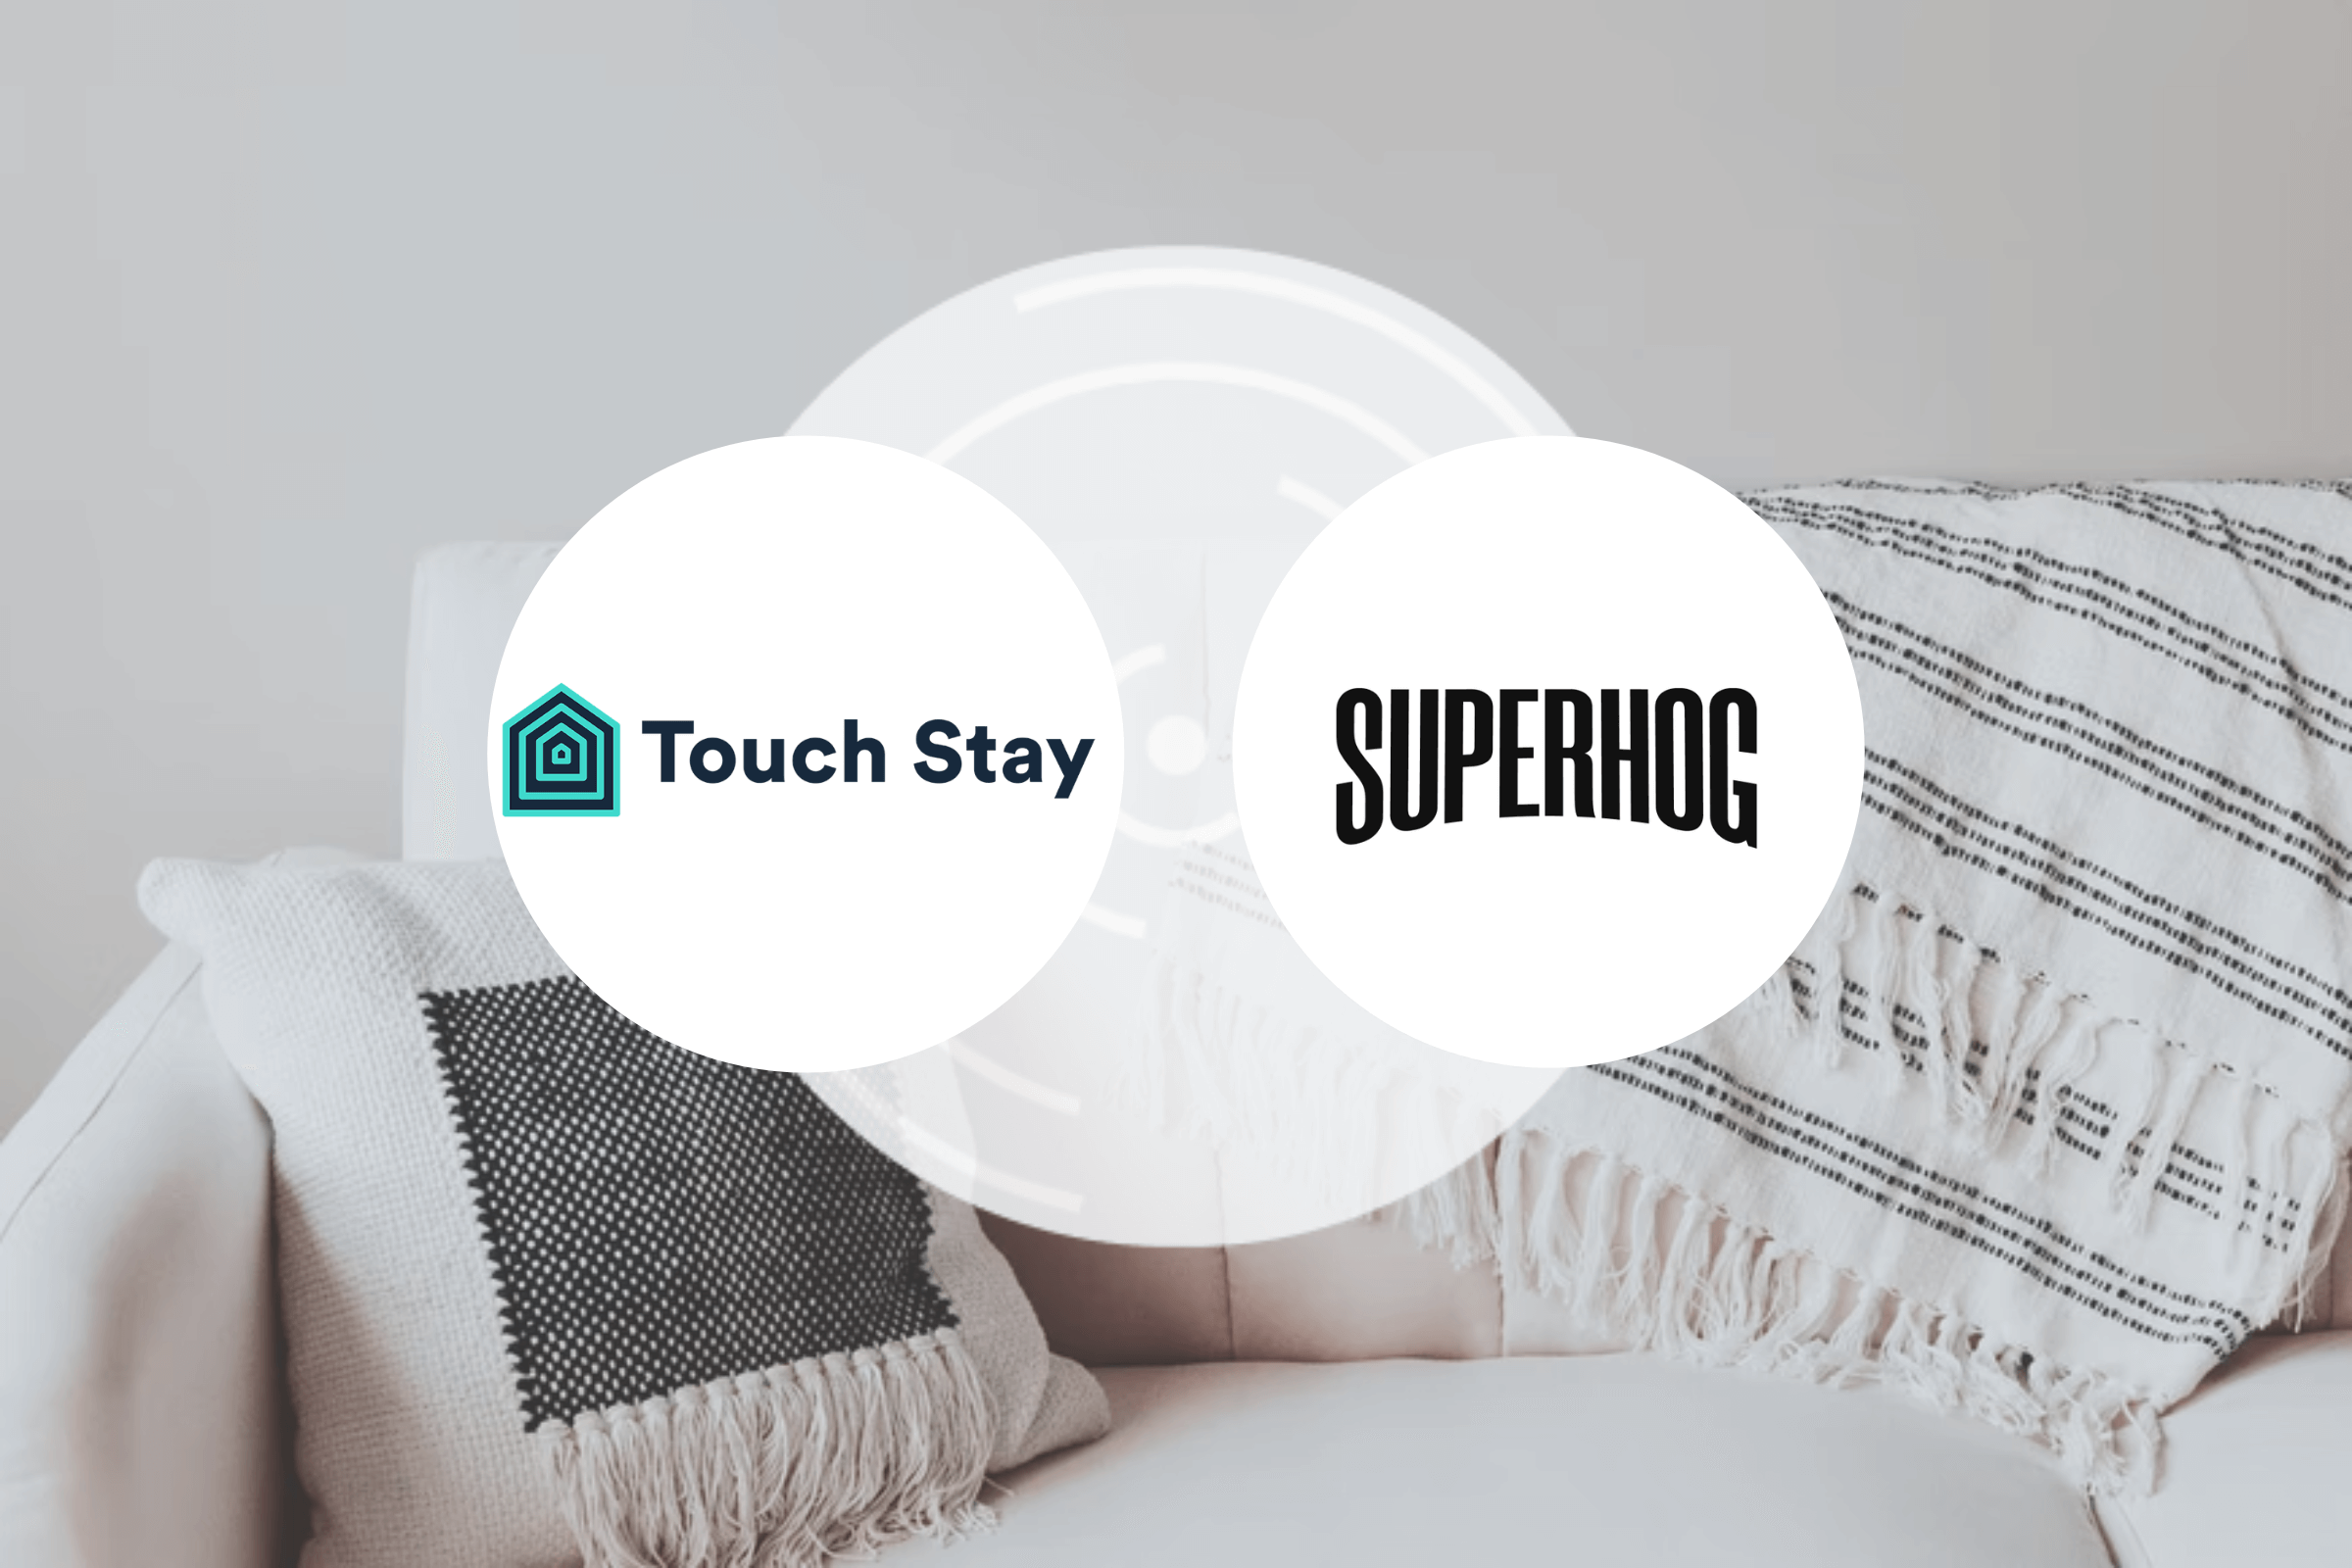 TouchStay X SUPERHOG Feature